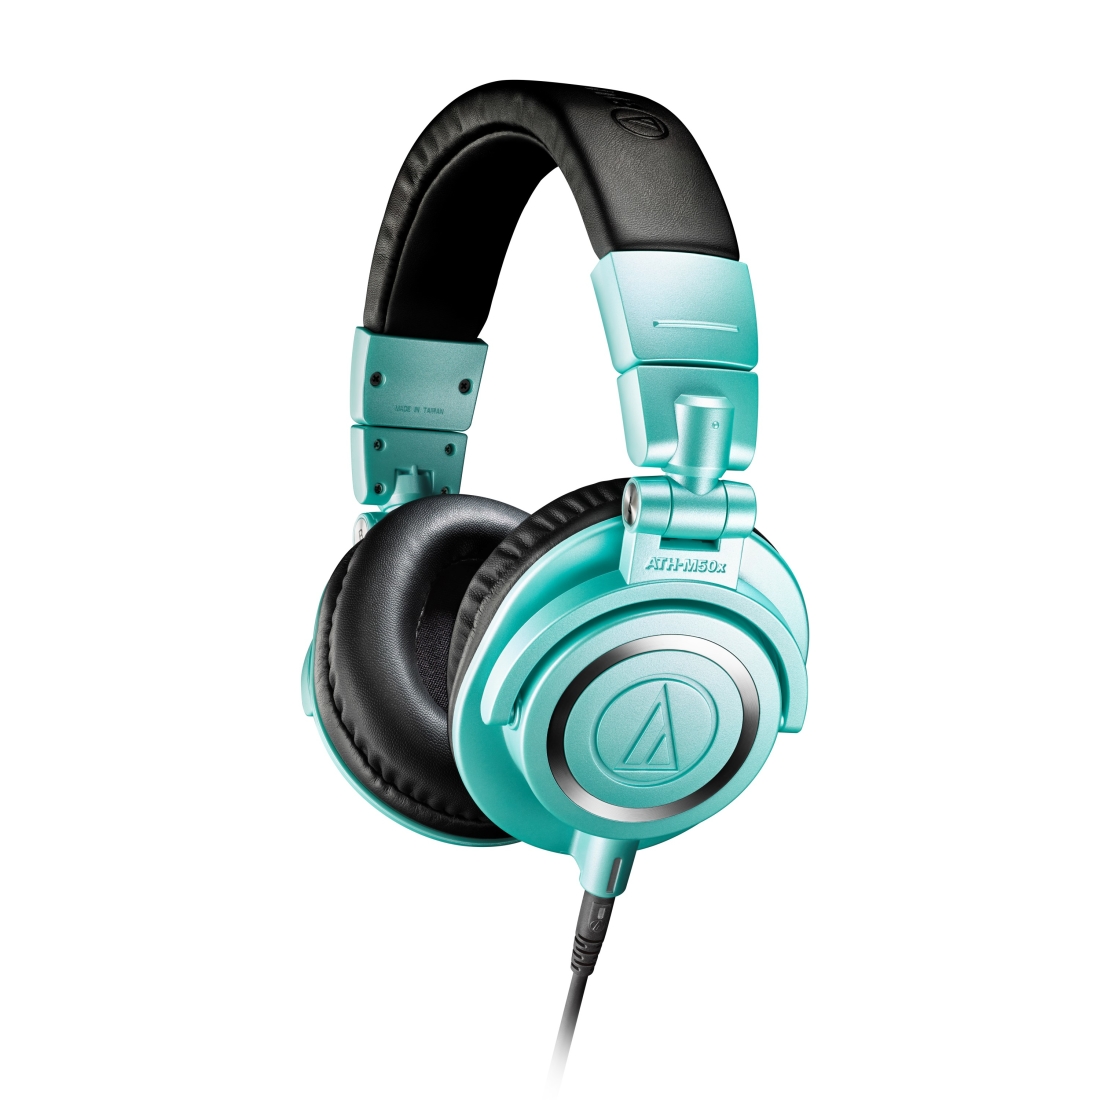 ATH-M50x Professional Closed Back Monitor Headphones - Limited Edition Ice Blue